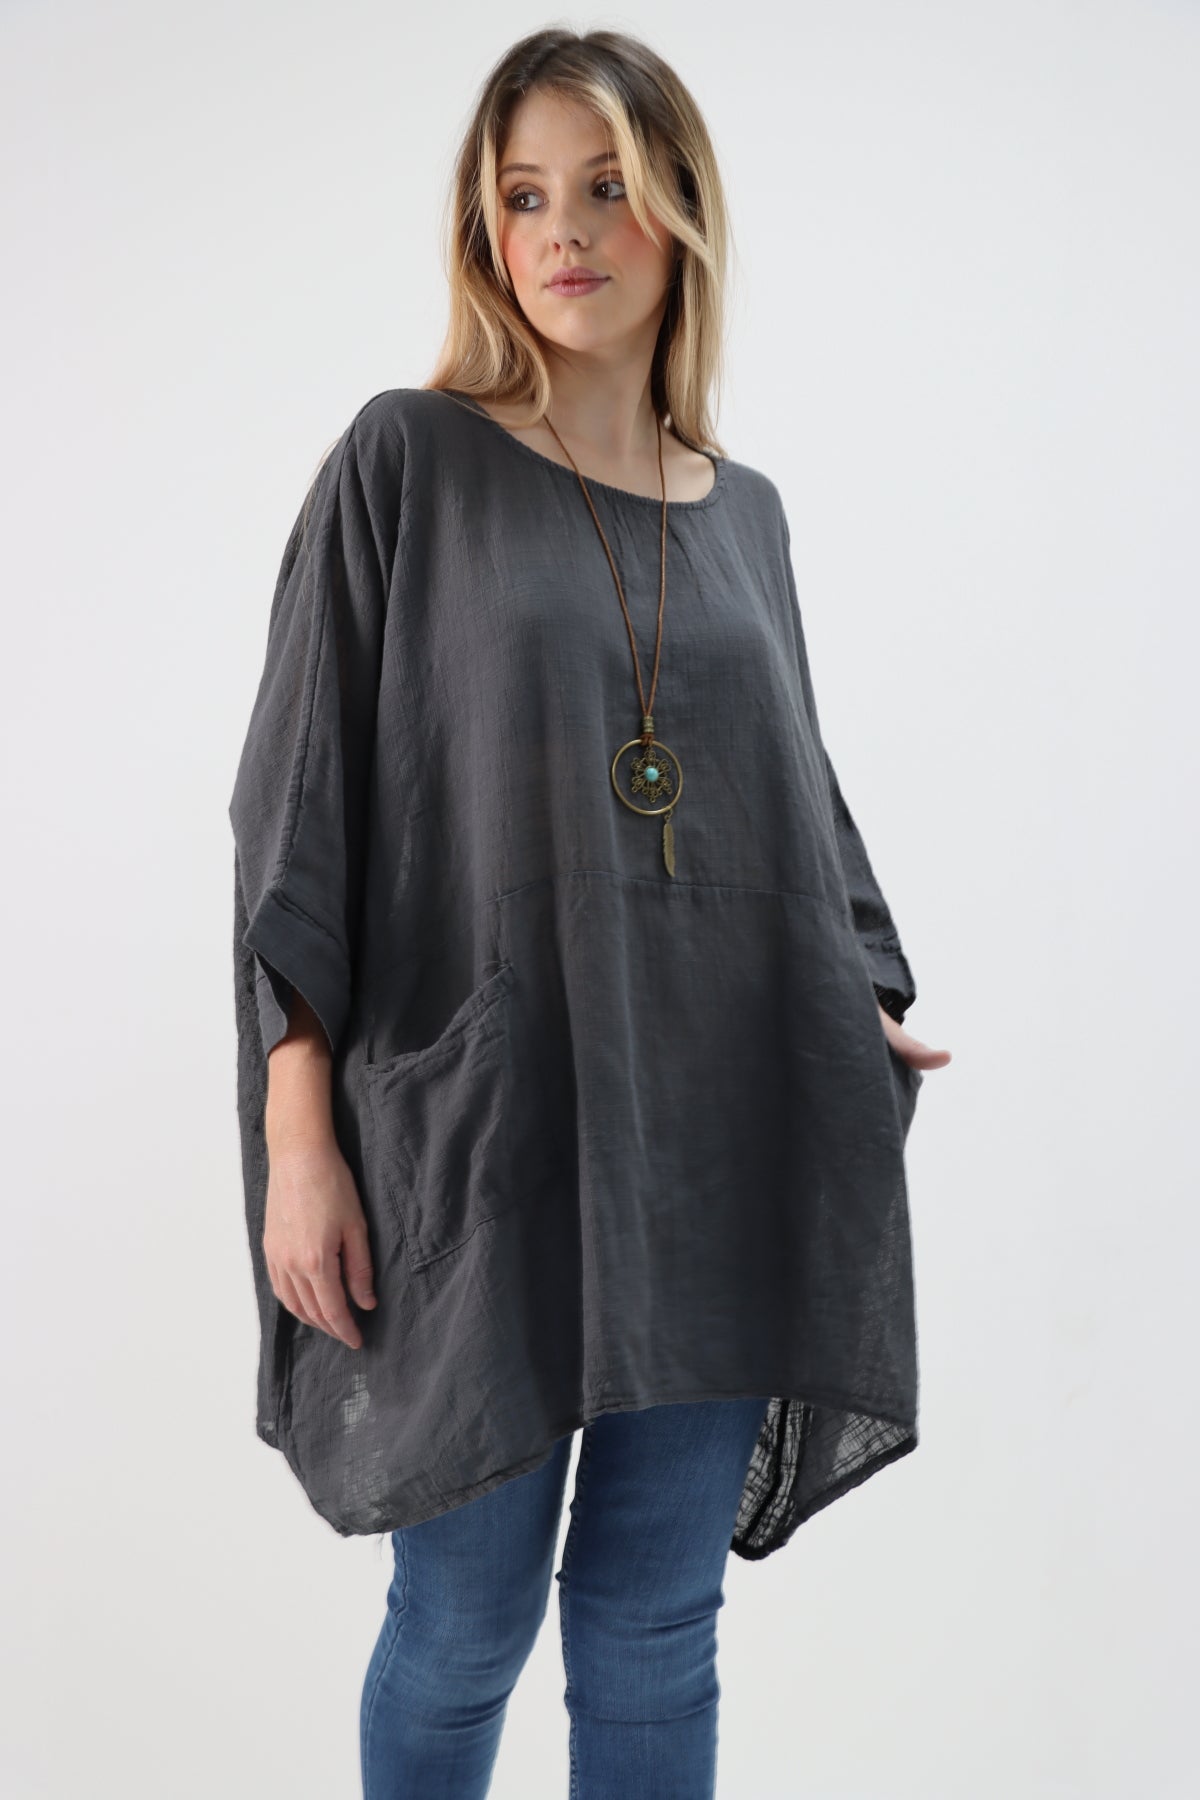 Made In Italy Cotton Necklace Batwing Top